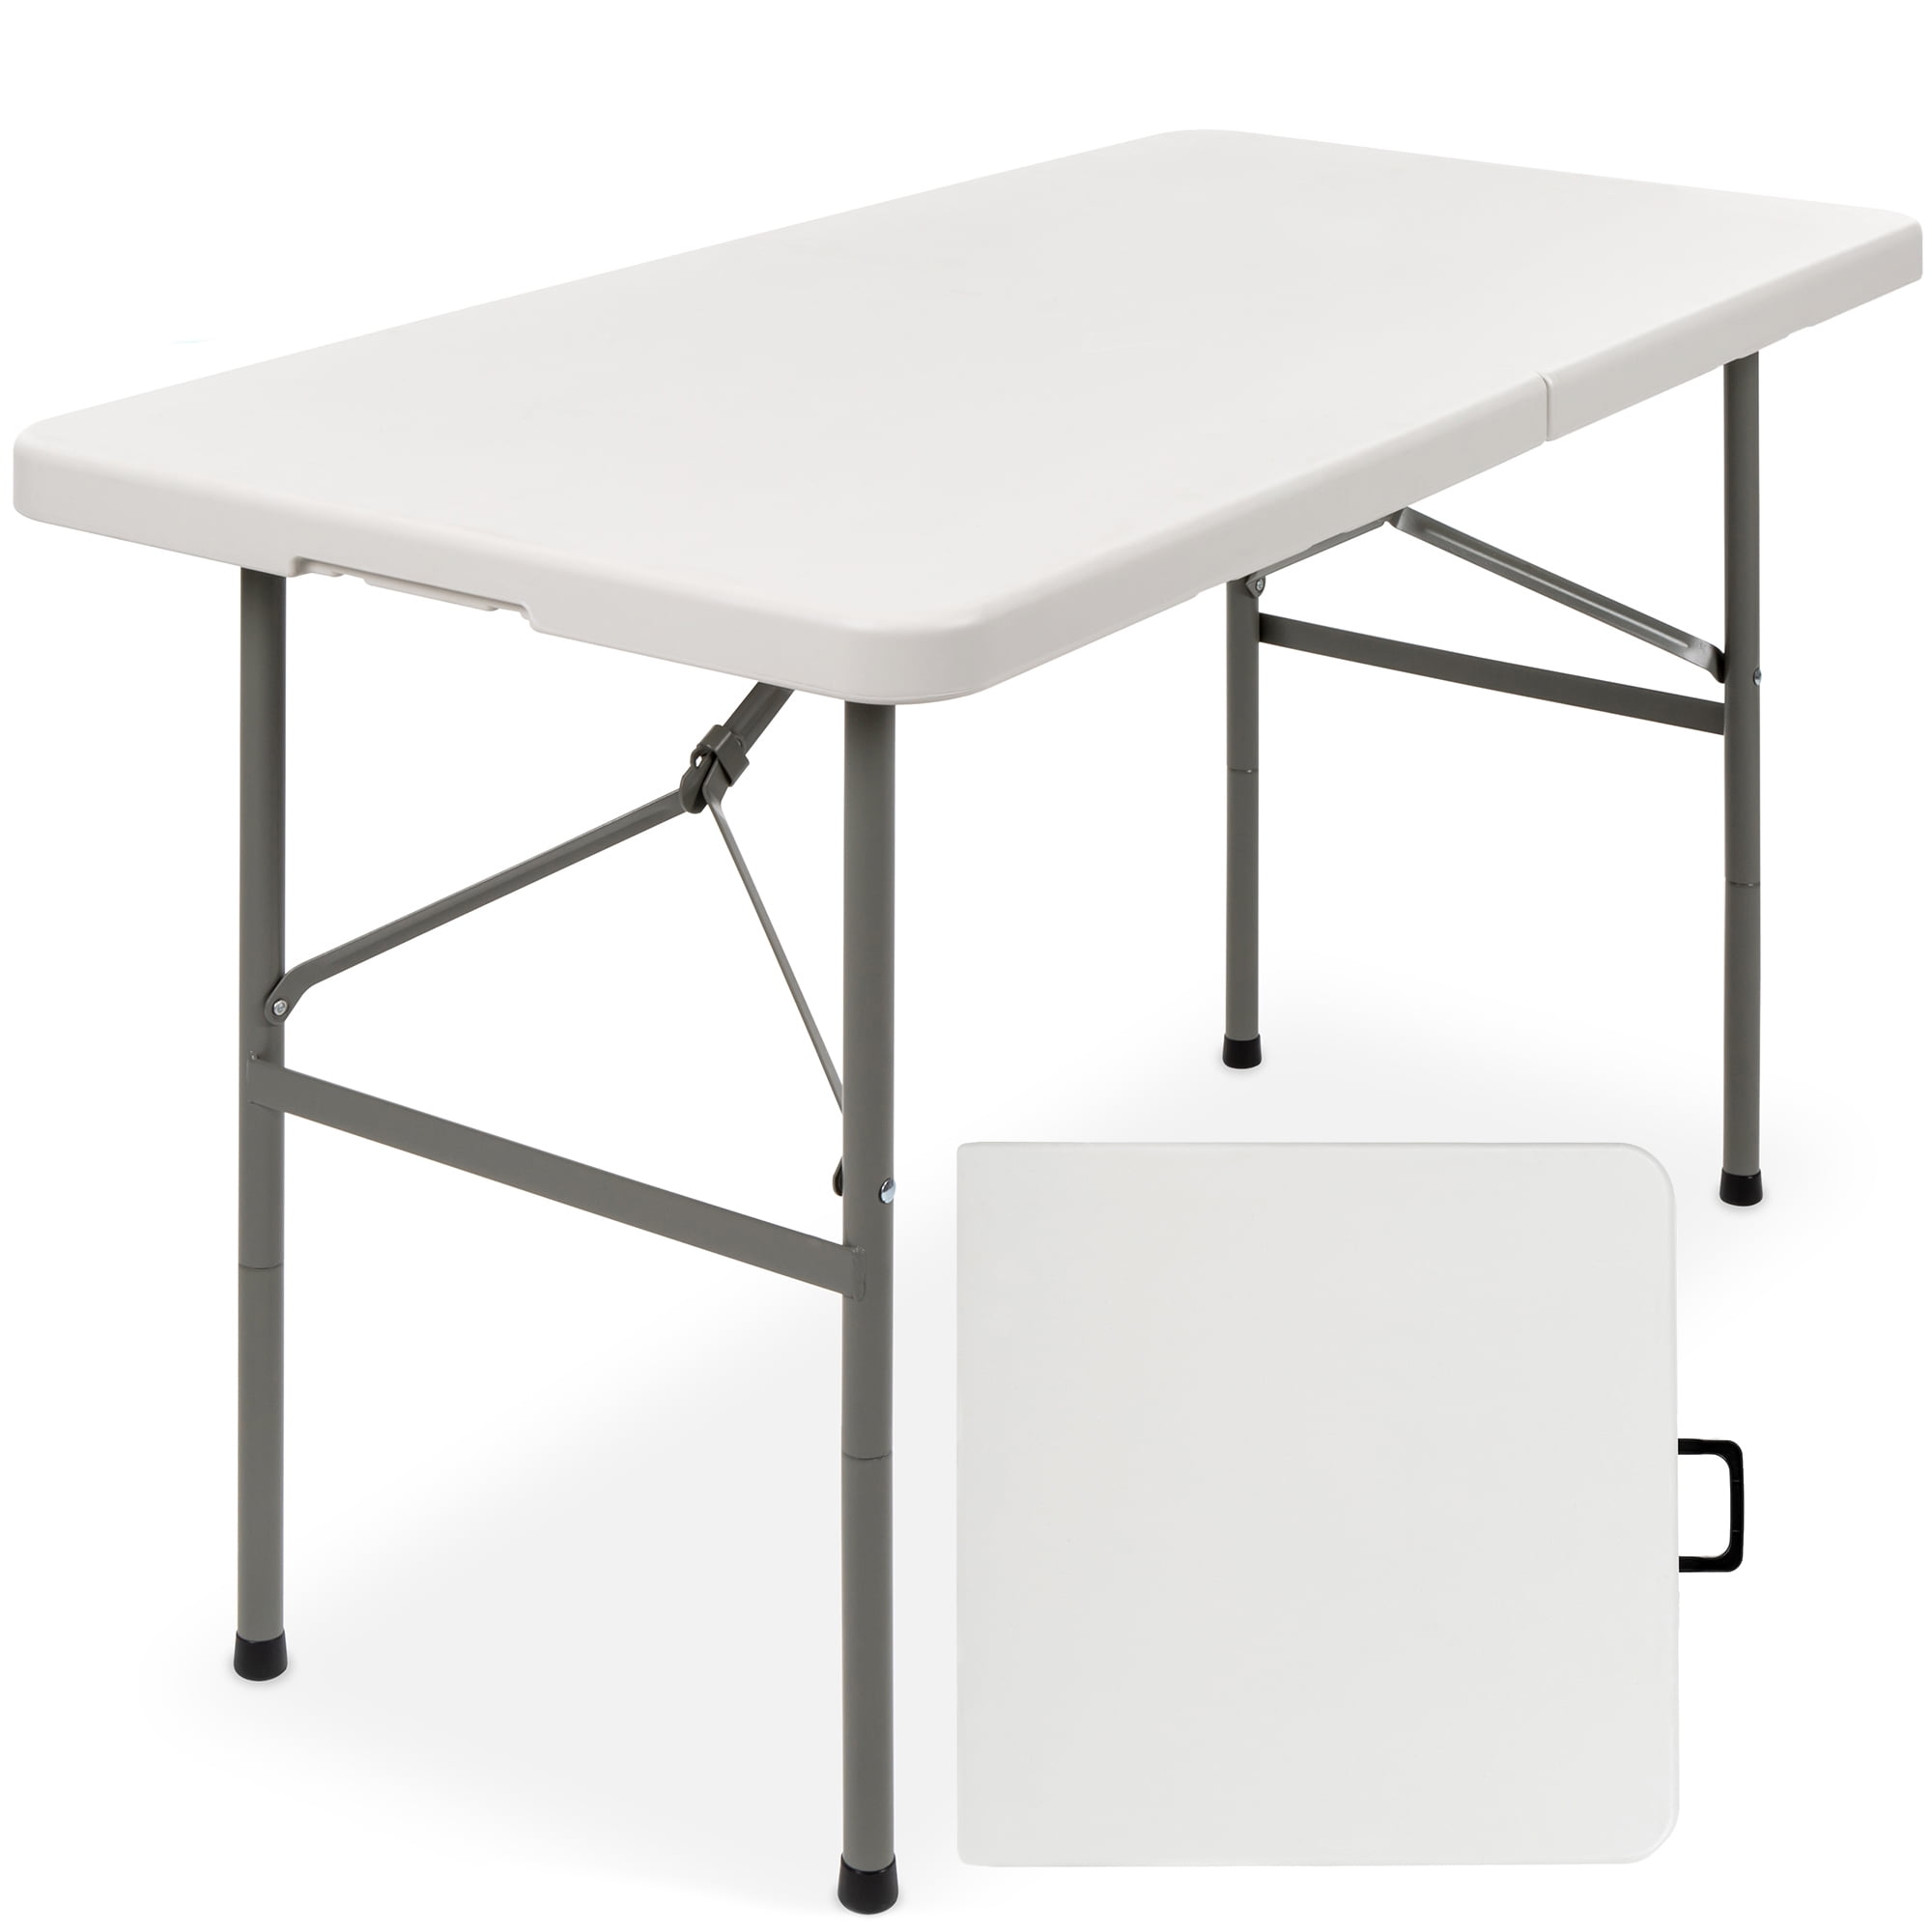 4Ft Folding Table Outdoor Indoor Portable Aluminum Picnic Party Camping Tables 